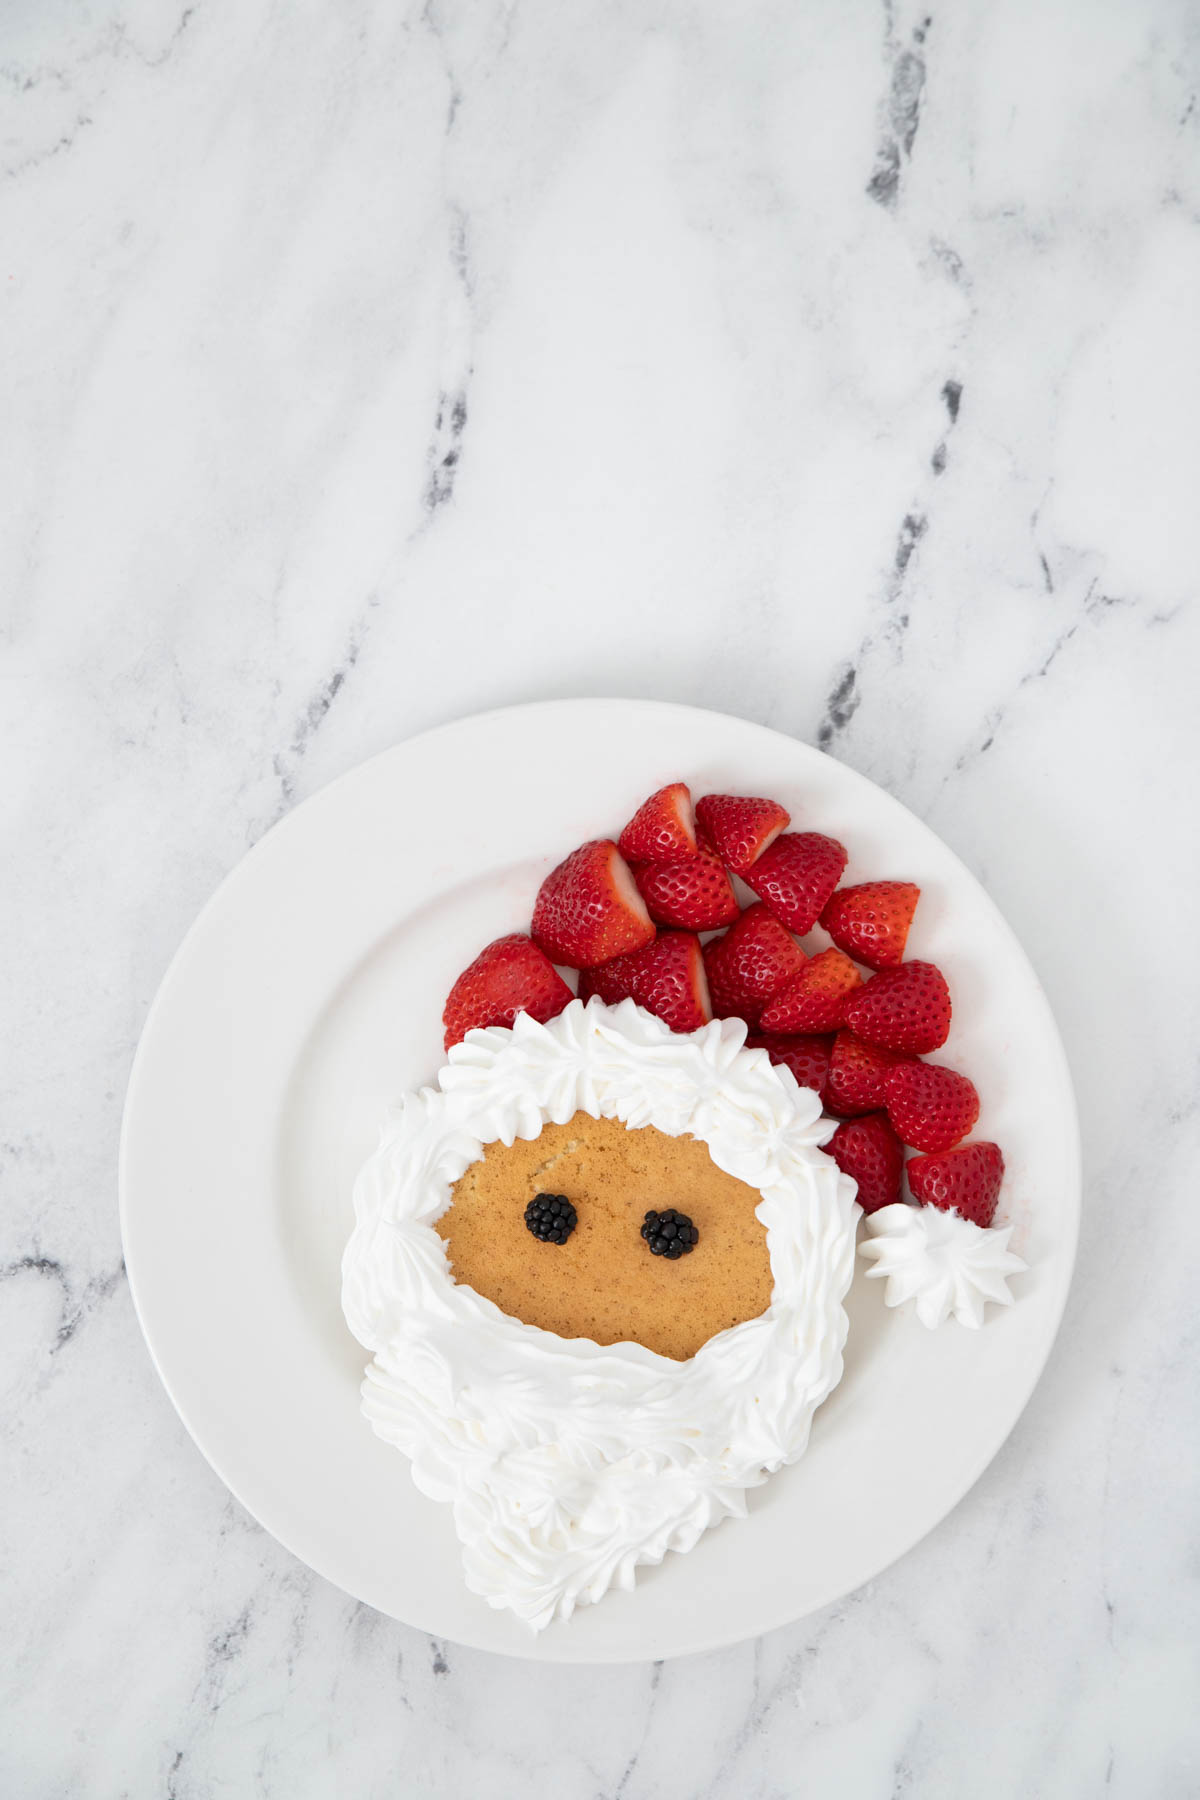 A plate with a santa claus shaped pancake and strawberries.